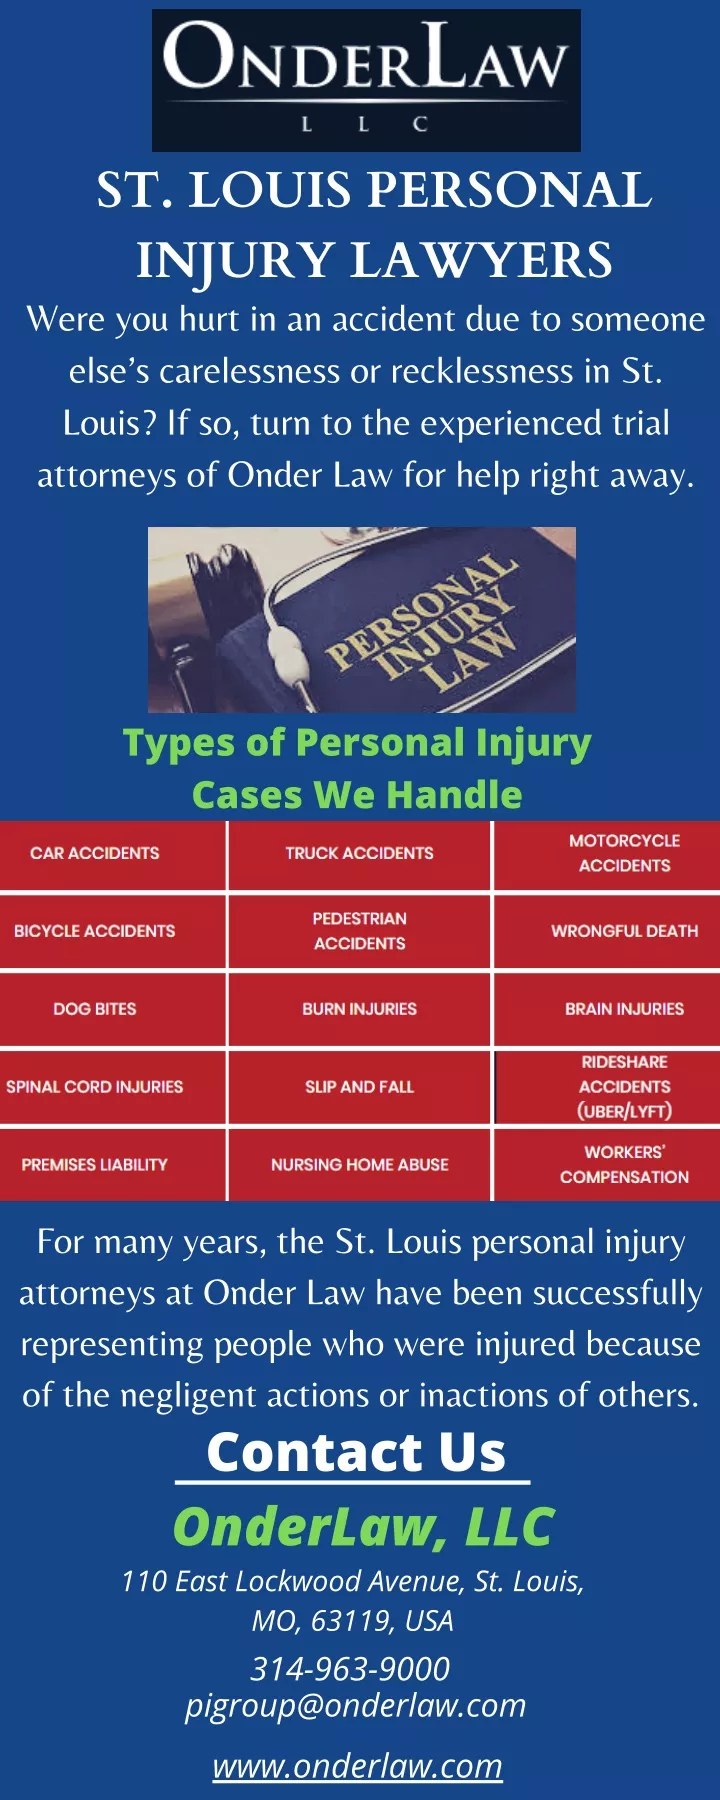 st louis personal injury lawyers were you hurt